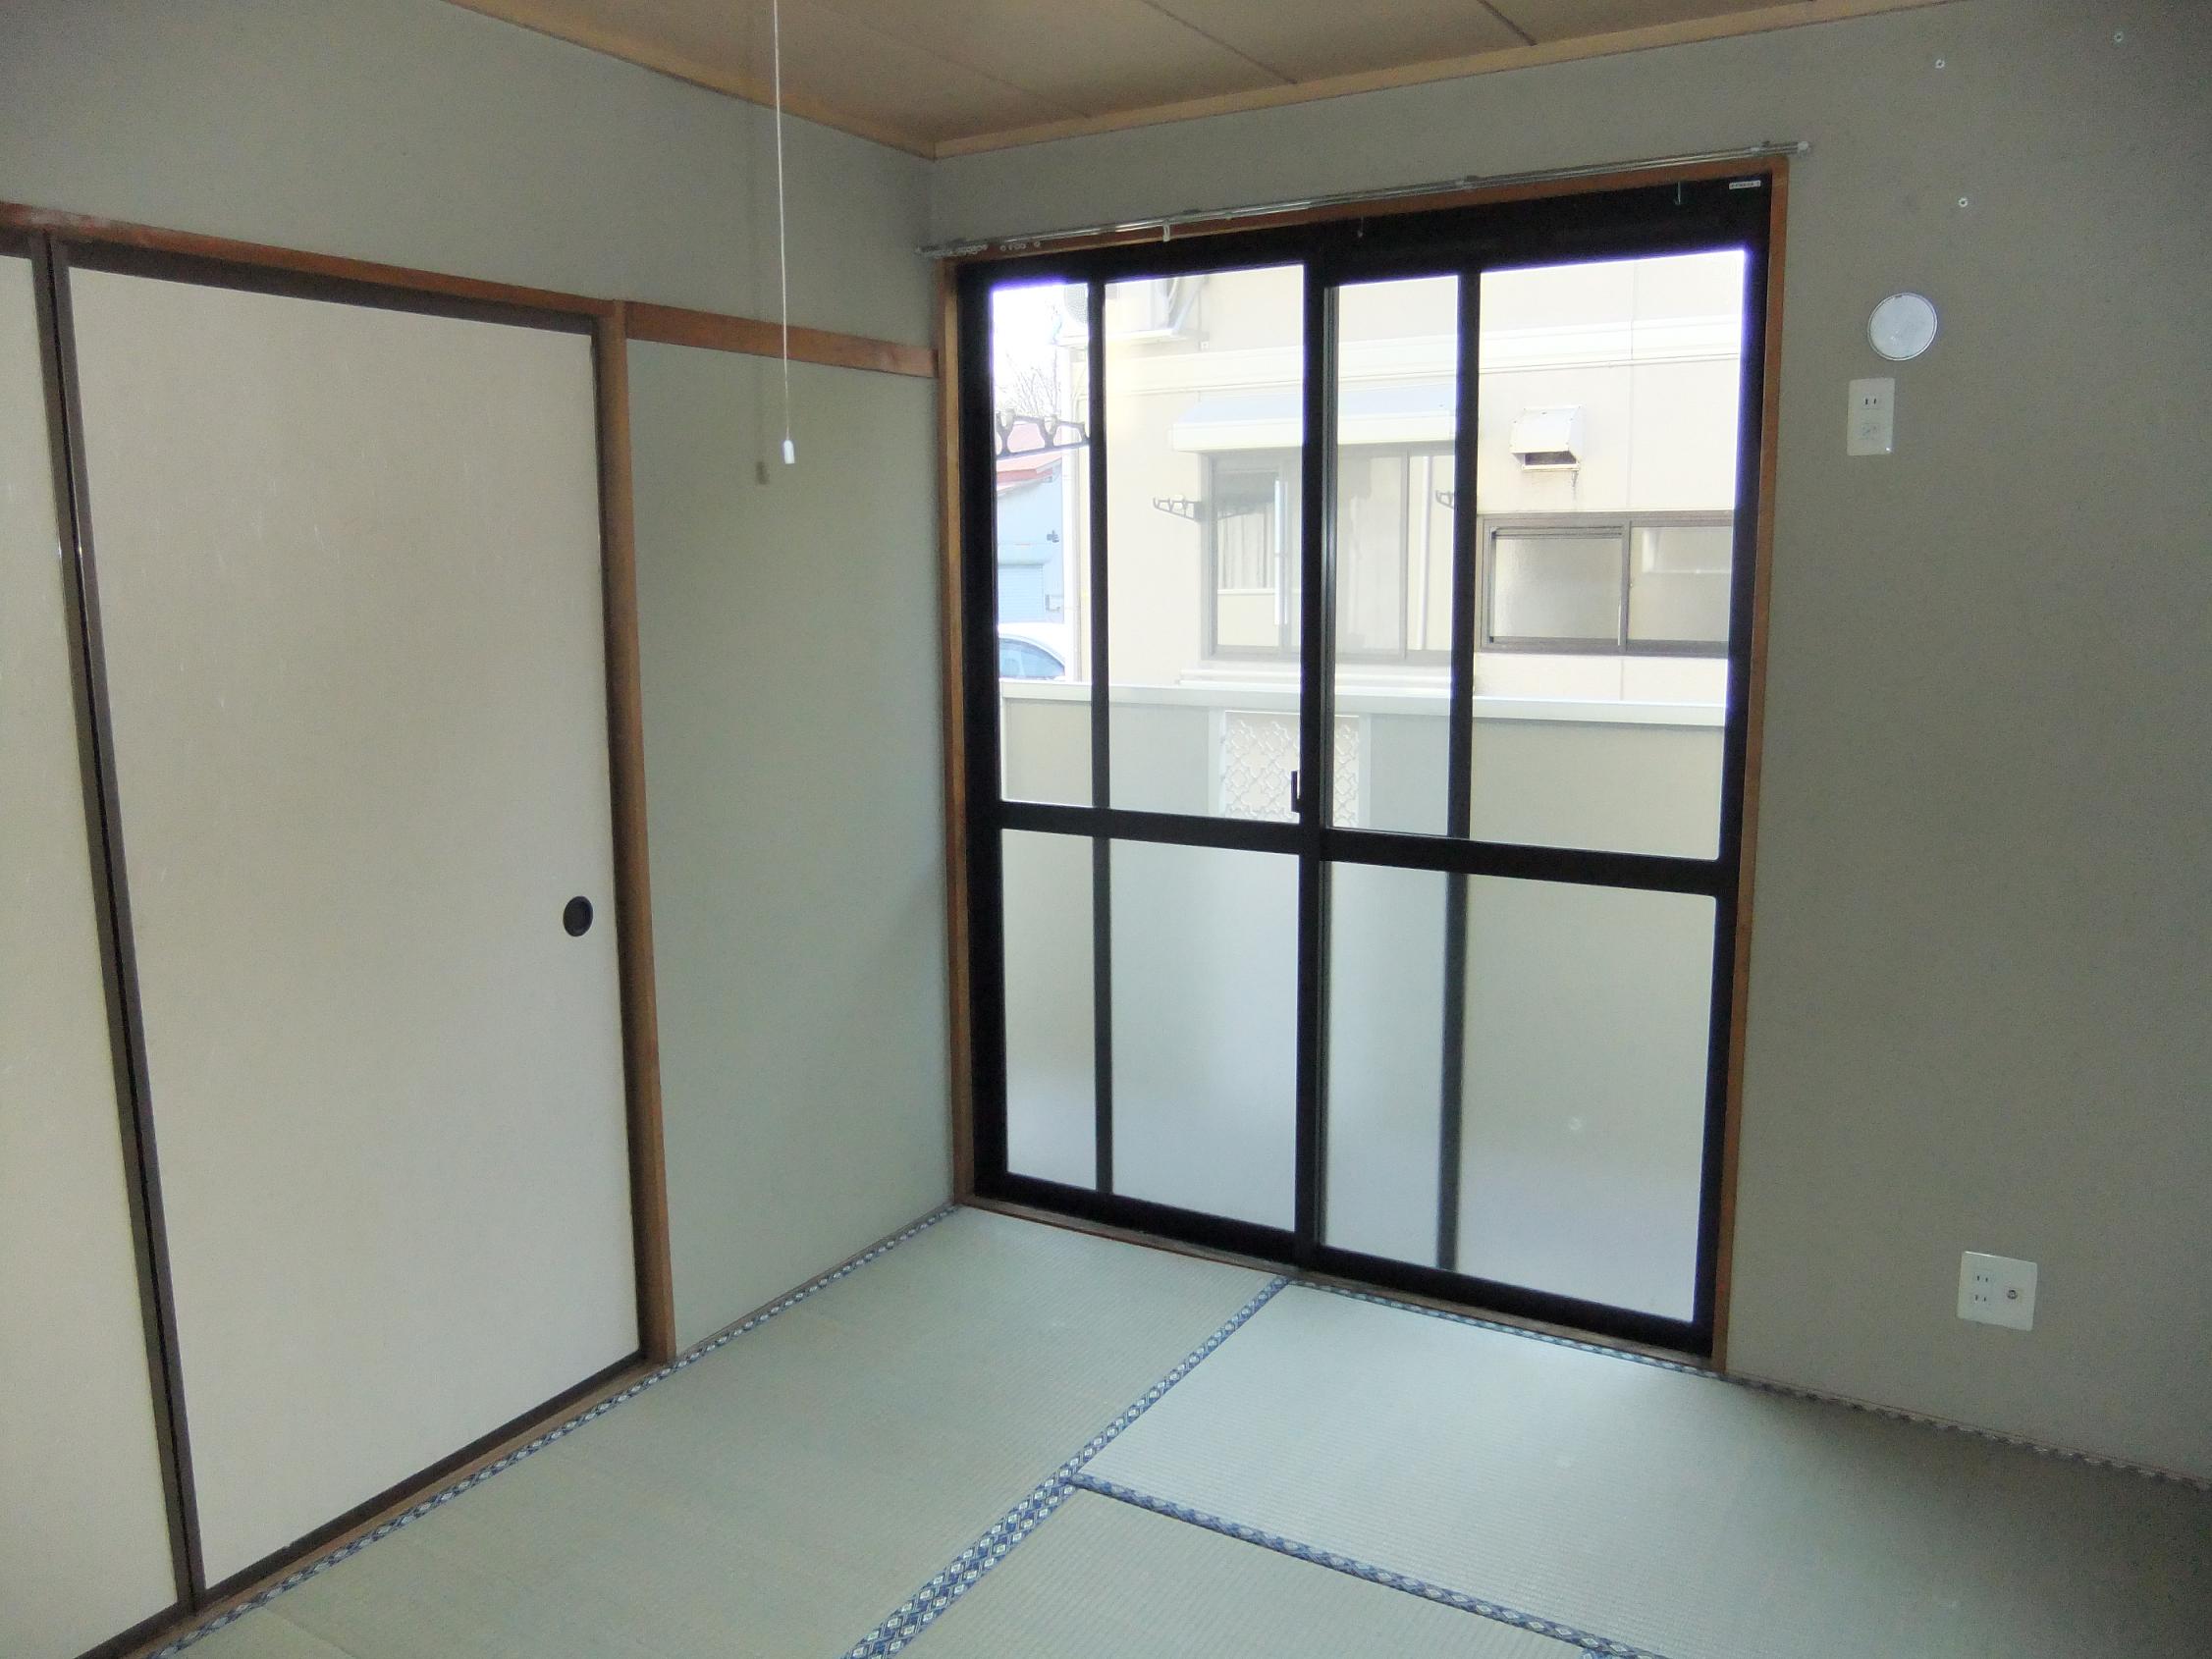 Living and room. It is the south side of the Japanese-style room